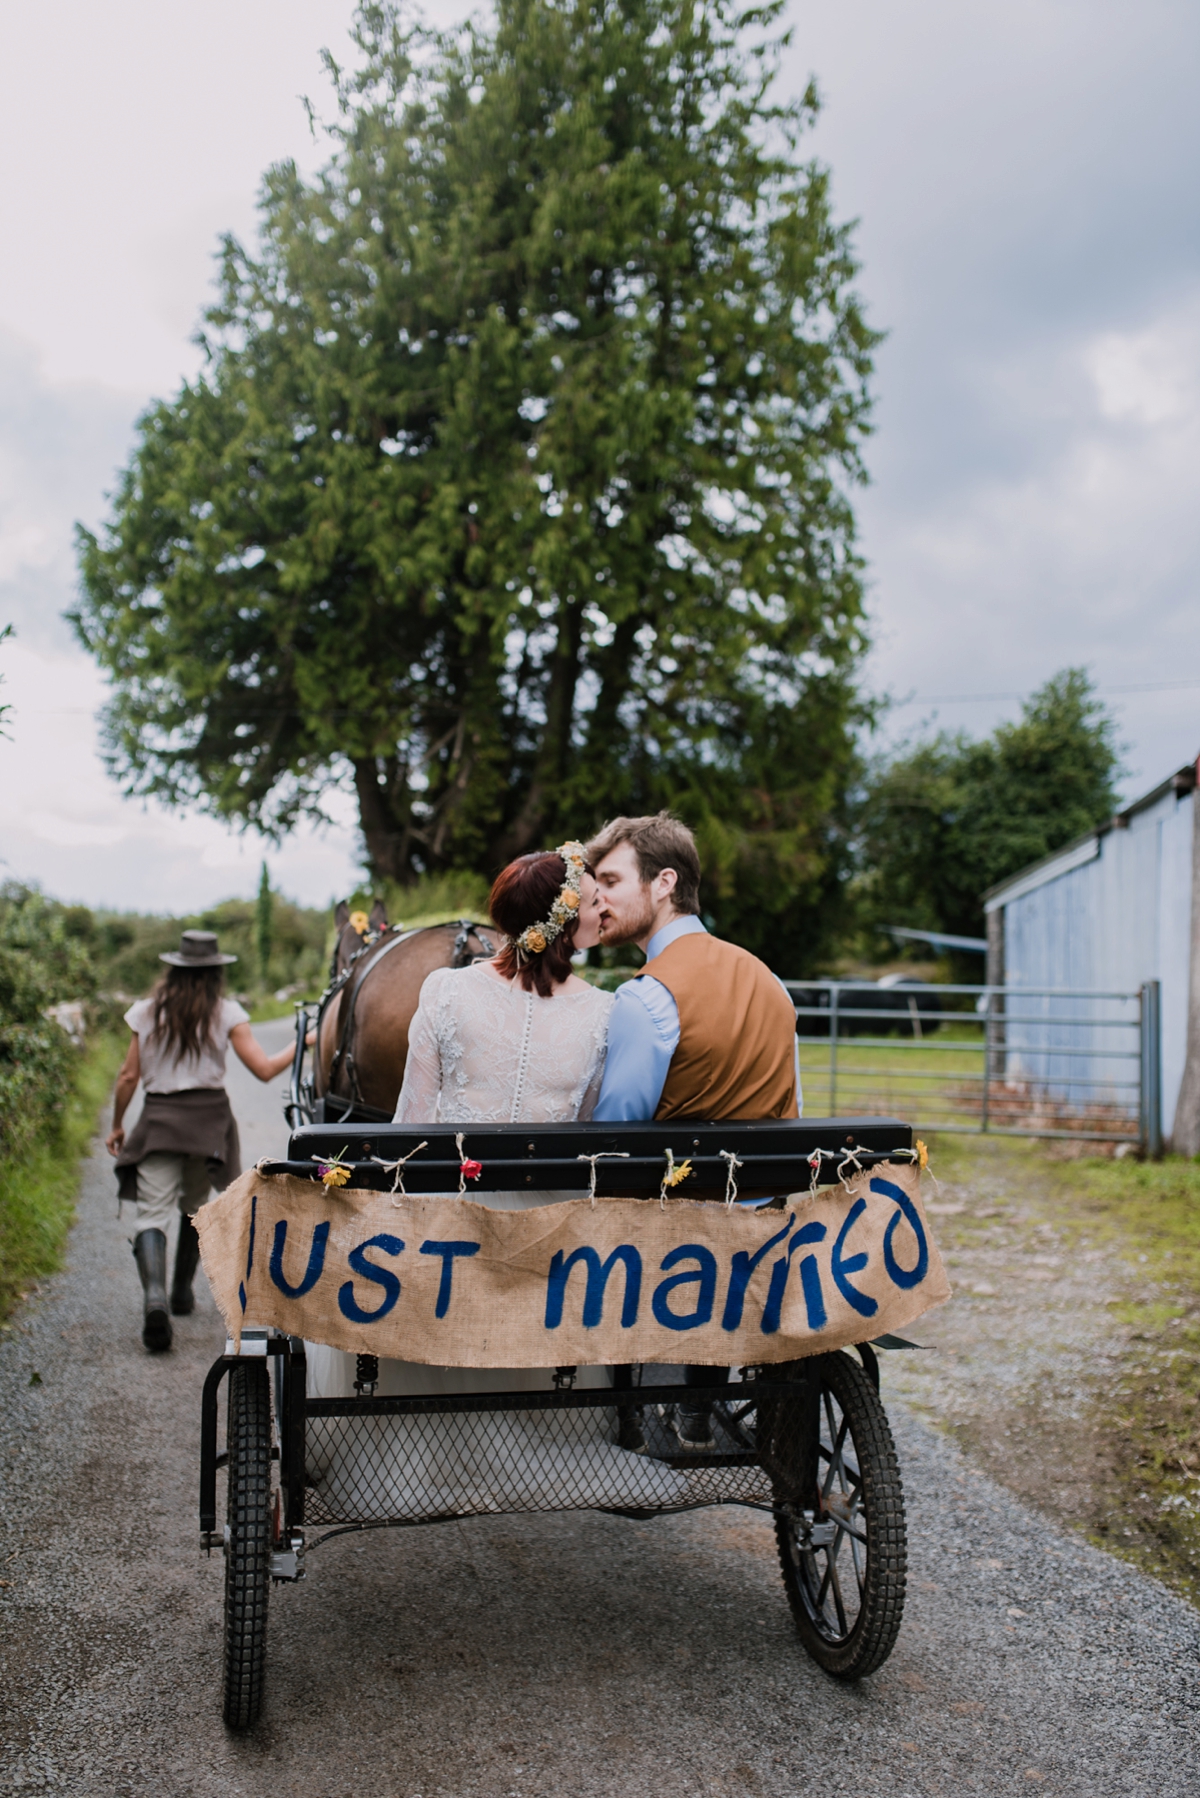 27 Horse and cart ride with a just married sign